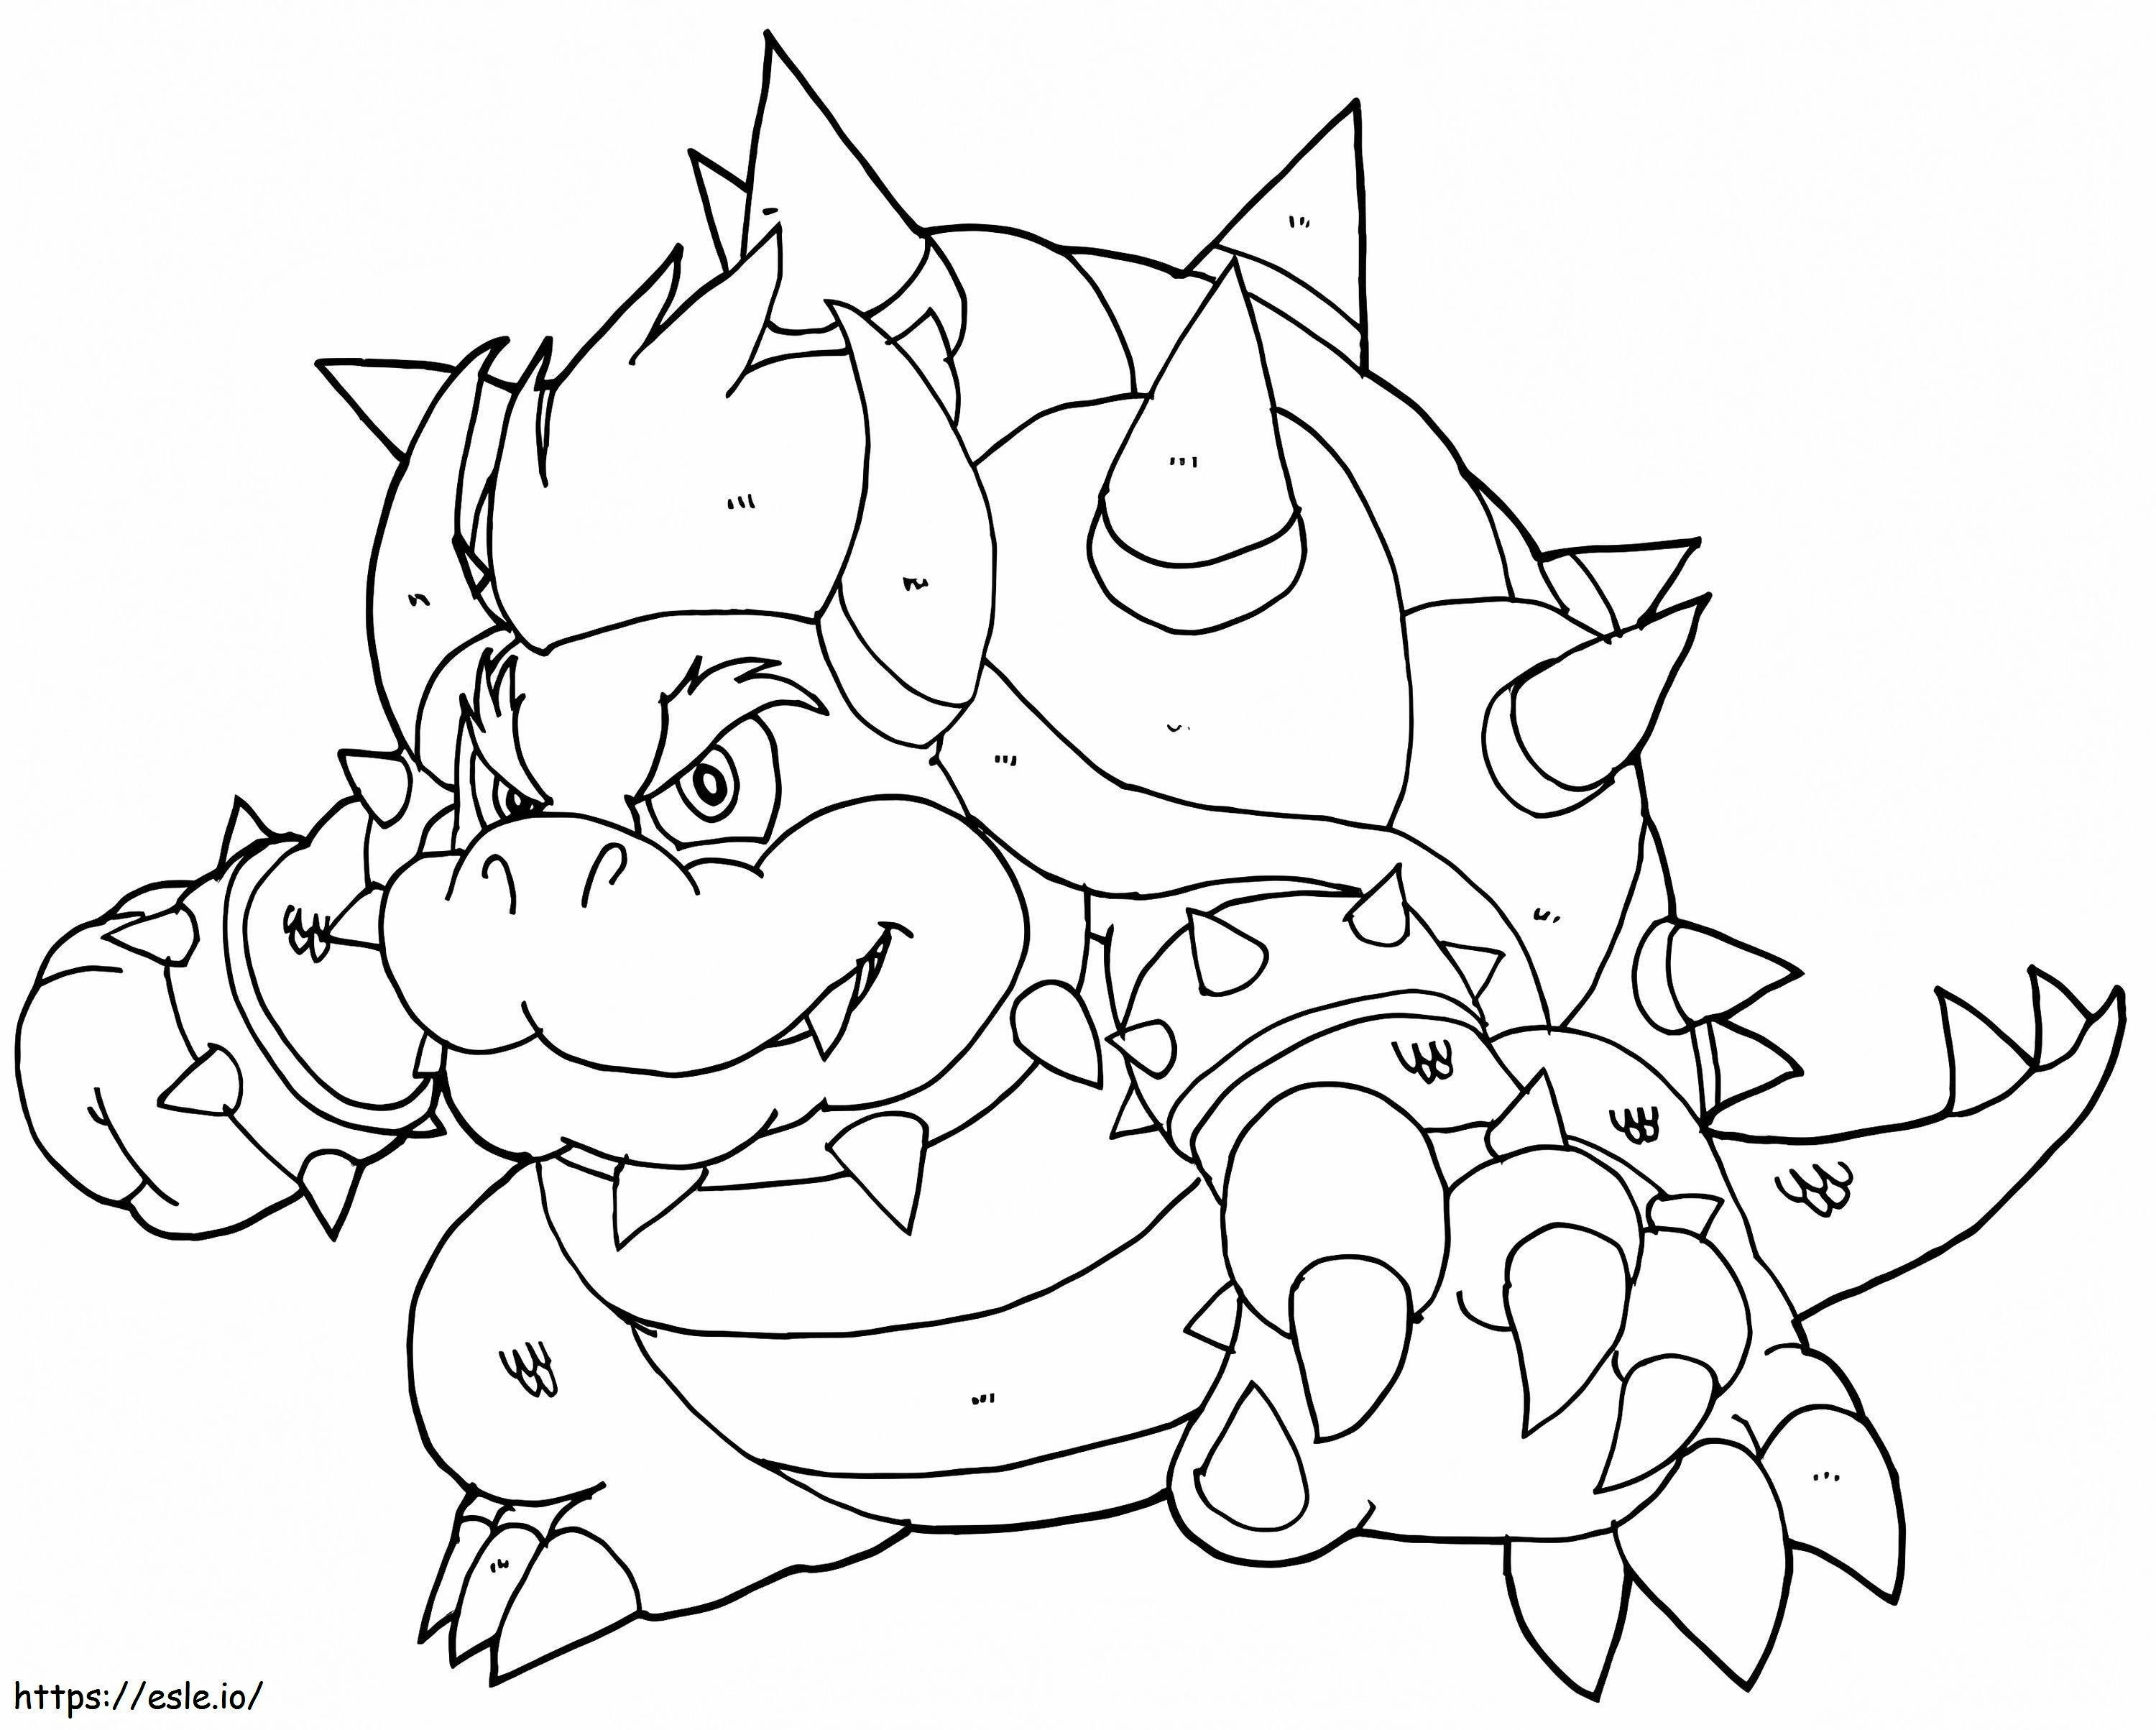 Bowser 3 coloring page